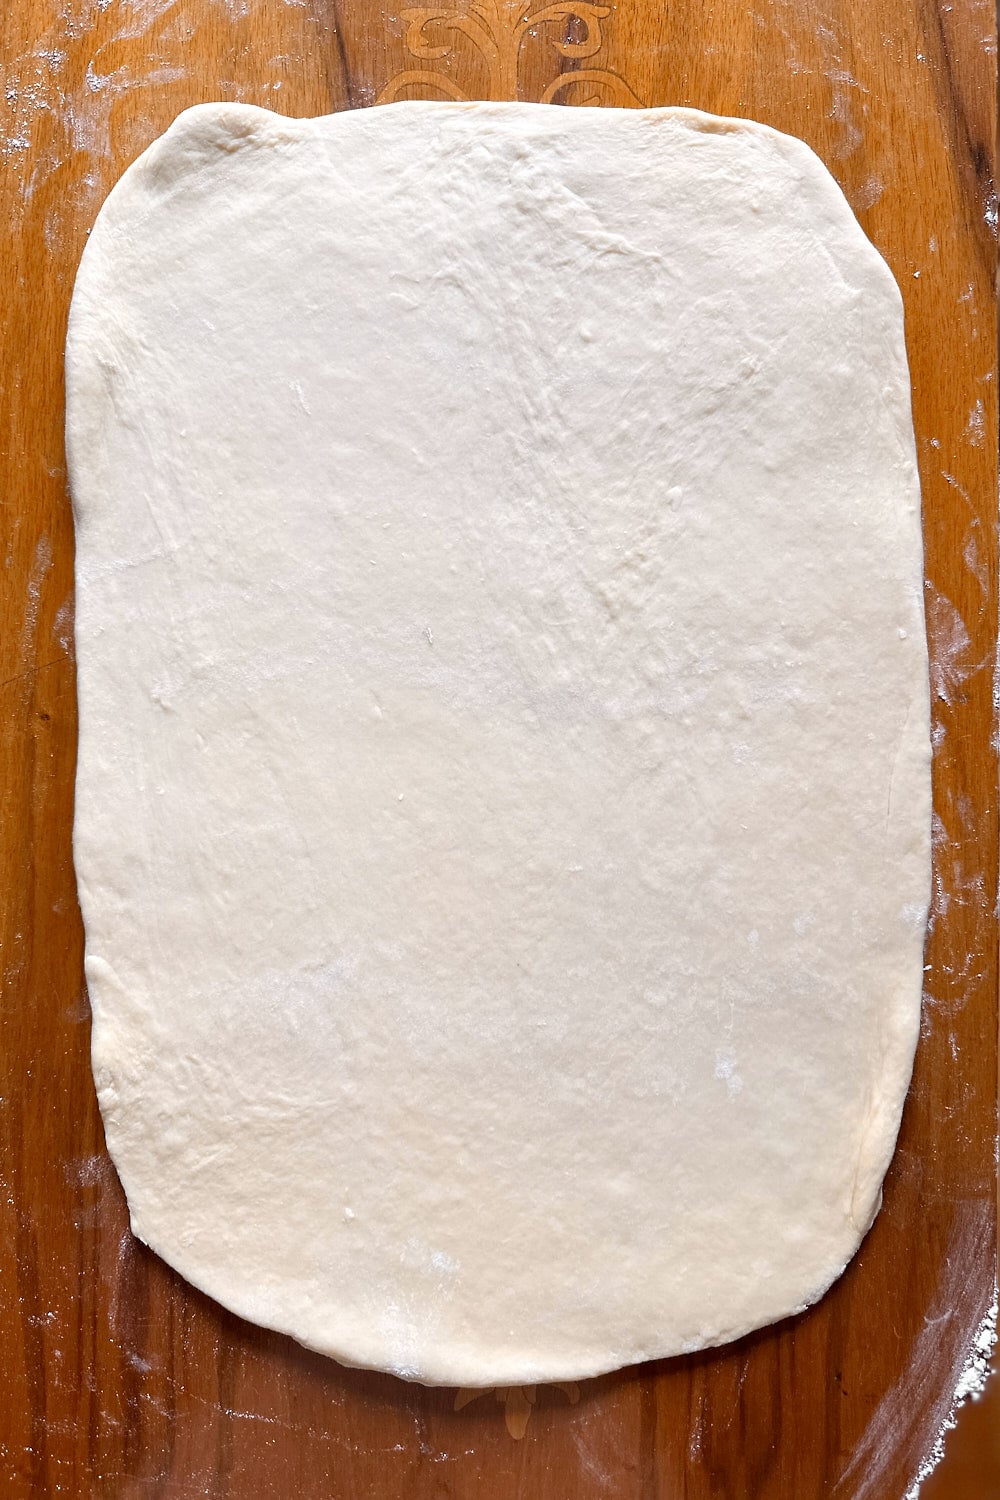 Rolling the dough out into a rectangle.